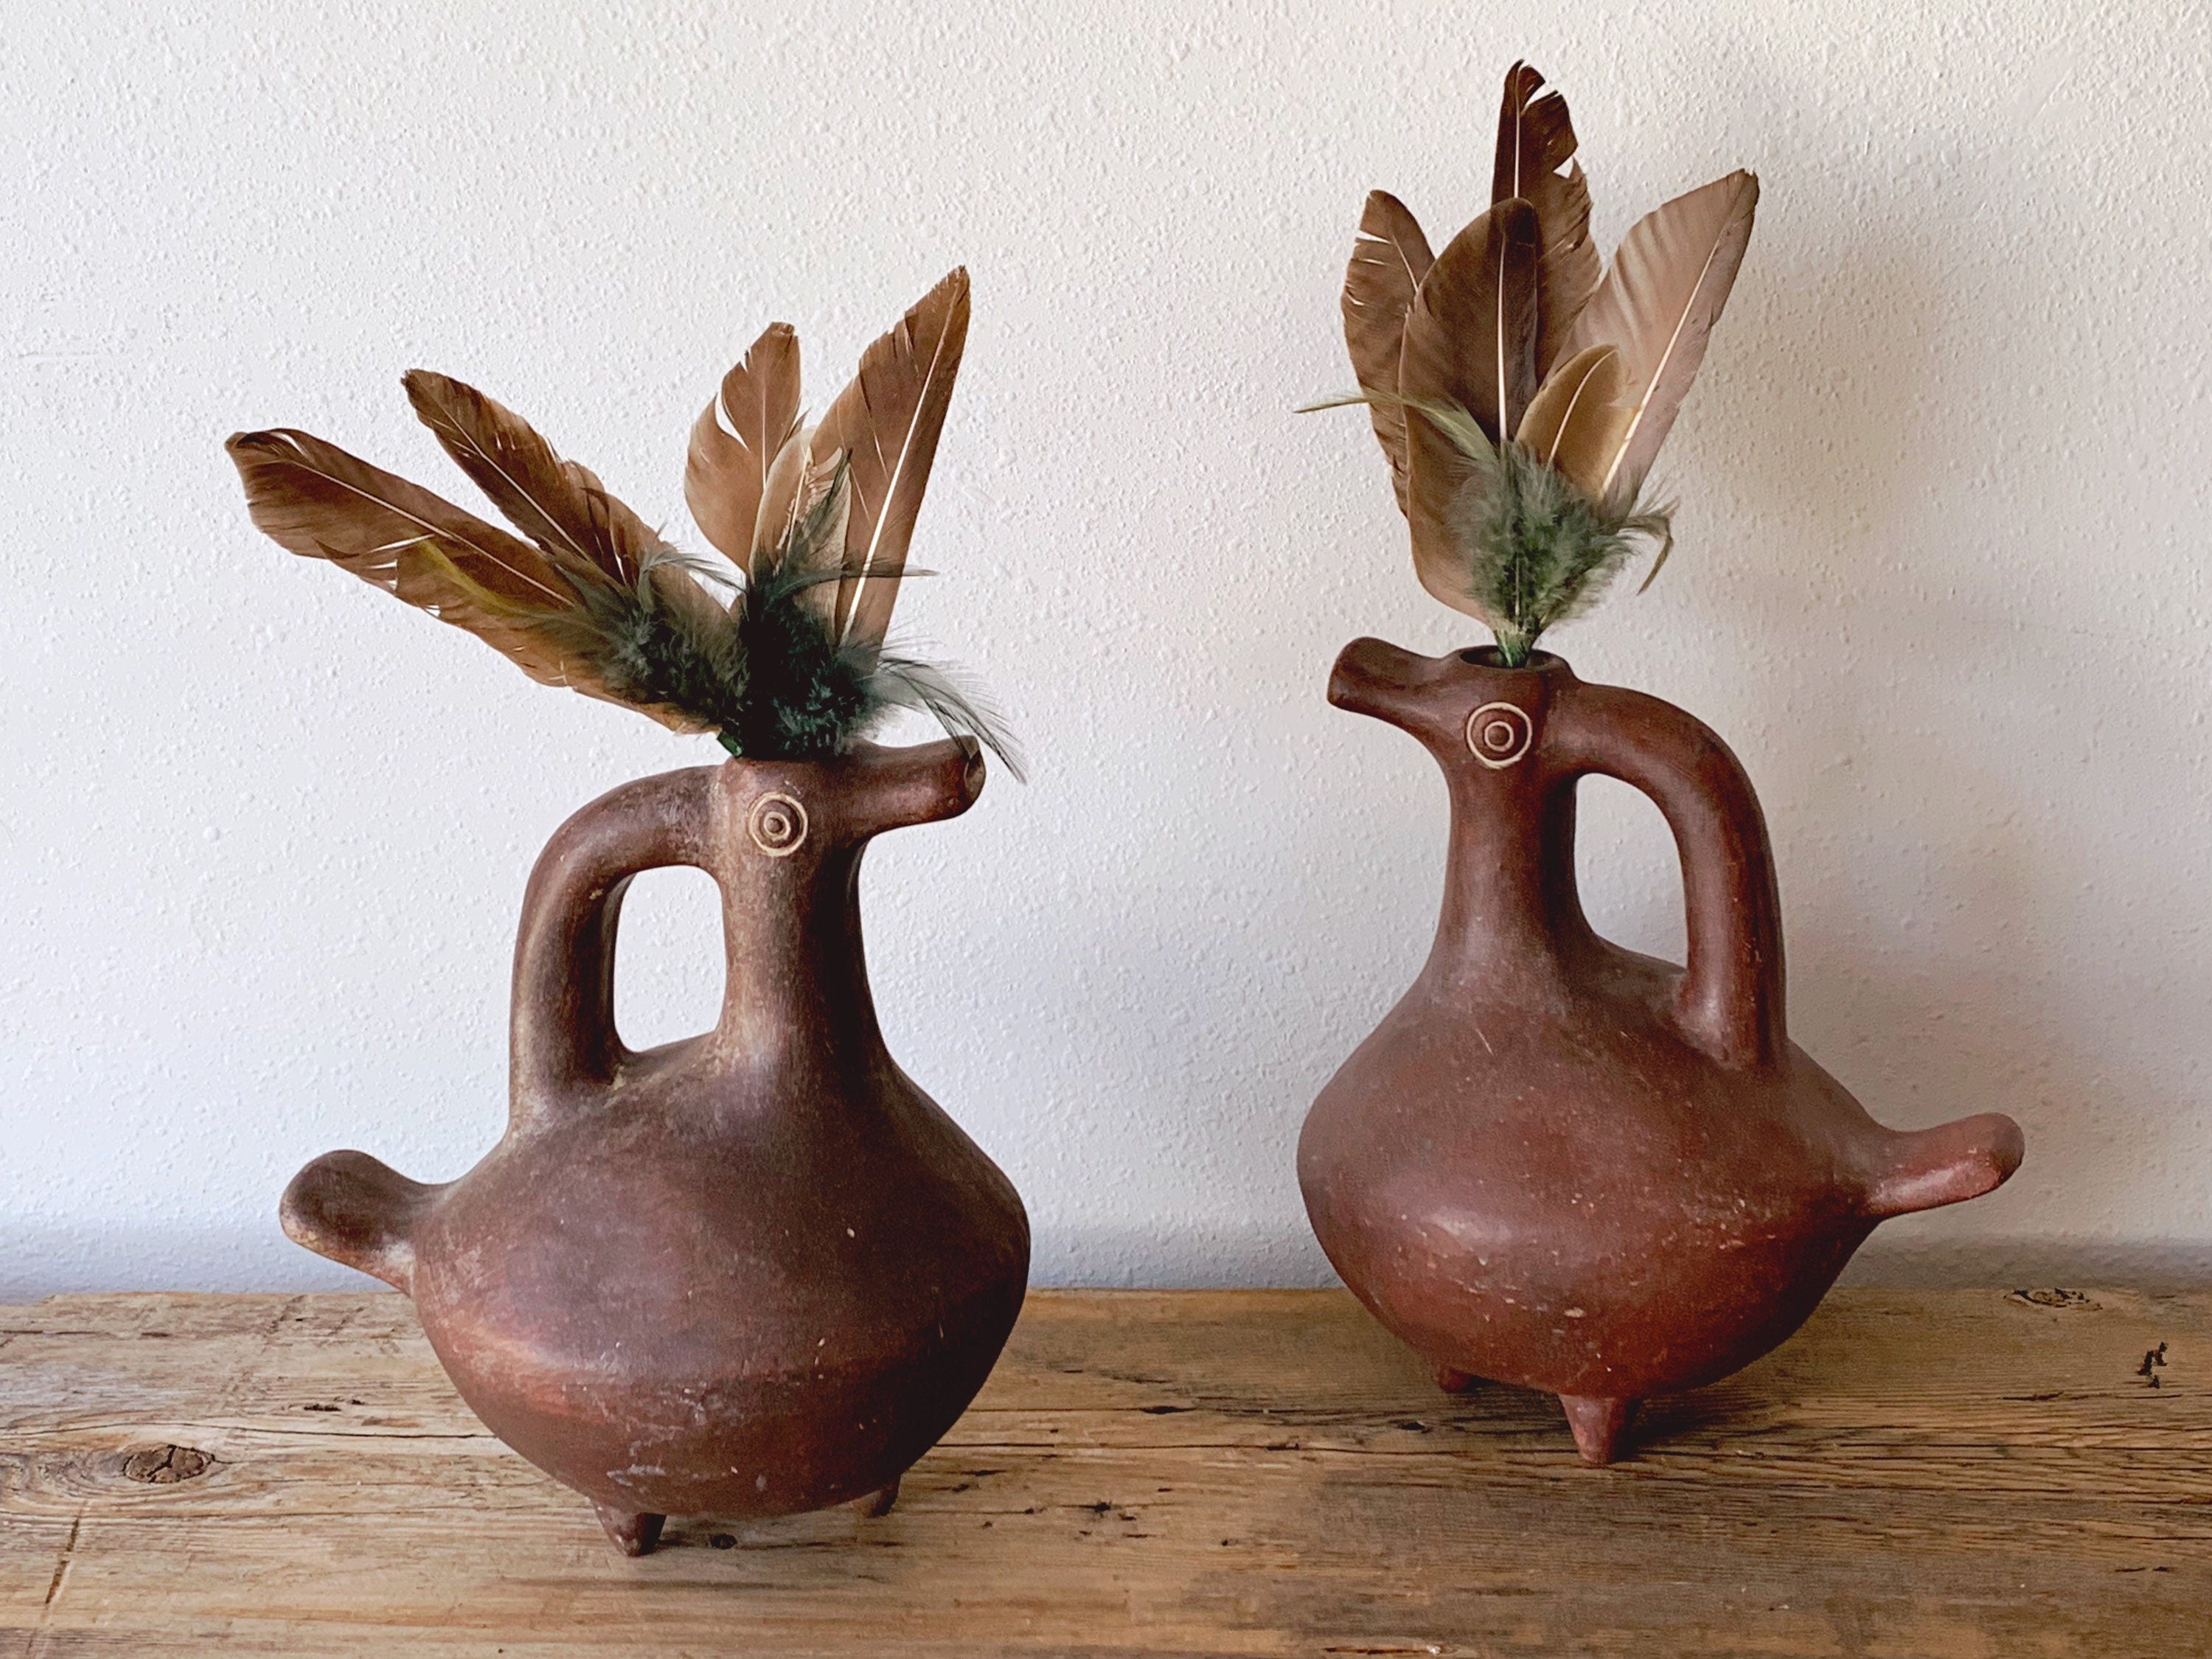 Pair of Vintage Hand Made Pottery Mexican Folk Art Bird Vessels | Terracotta Duck Vase with Handle | Rustic Southwestern Style Home Decor